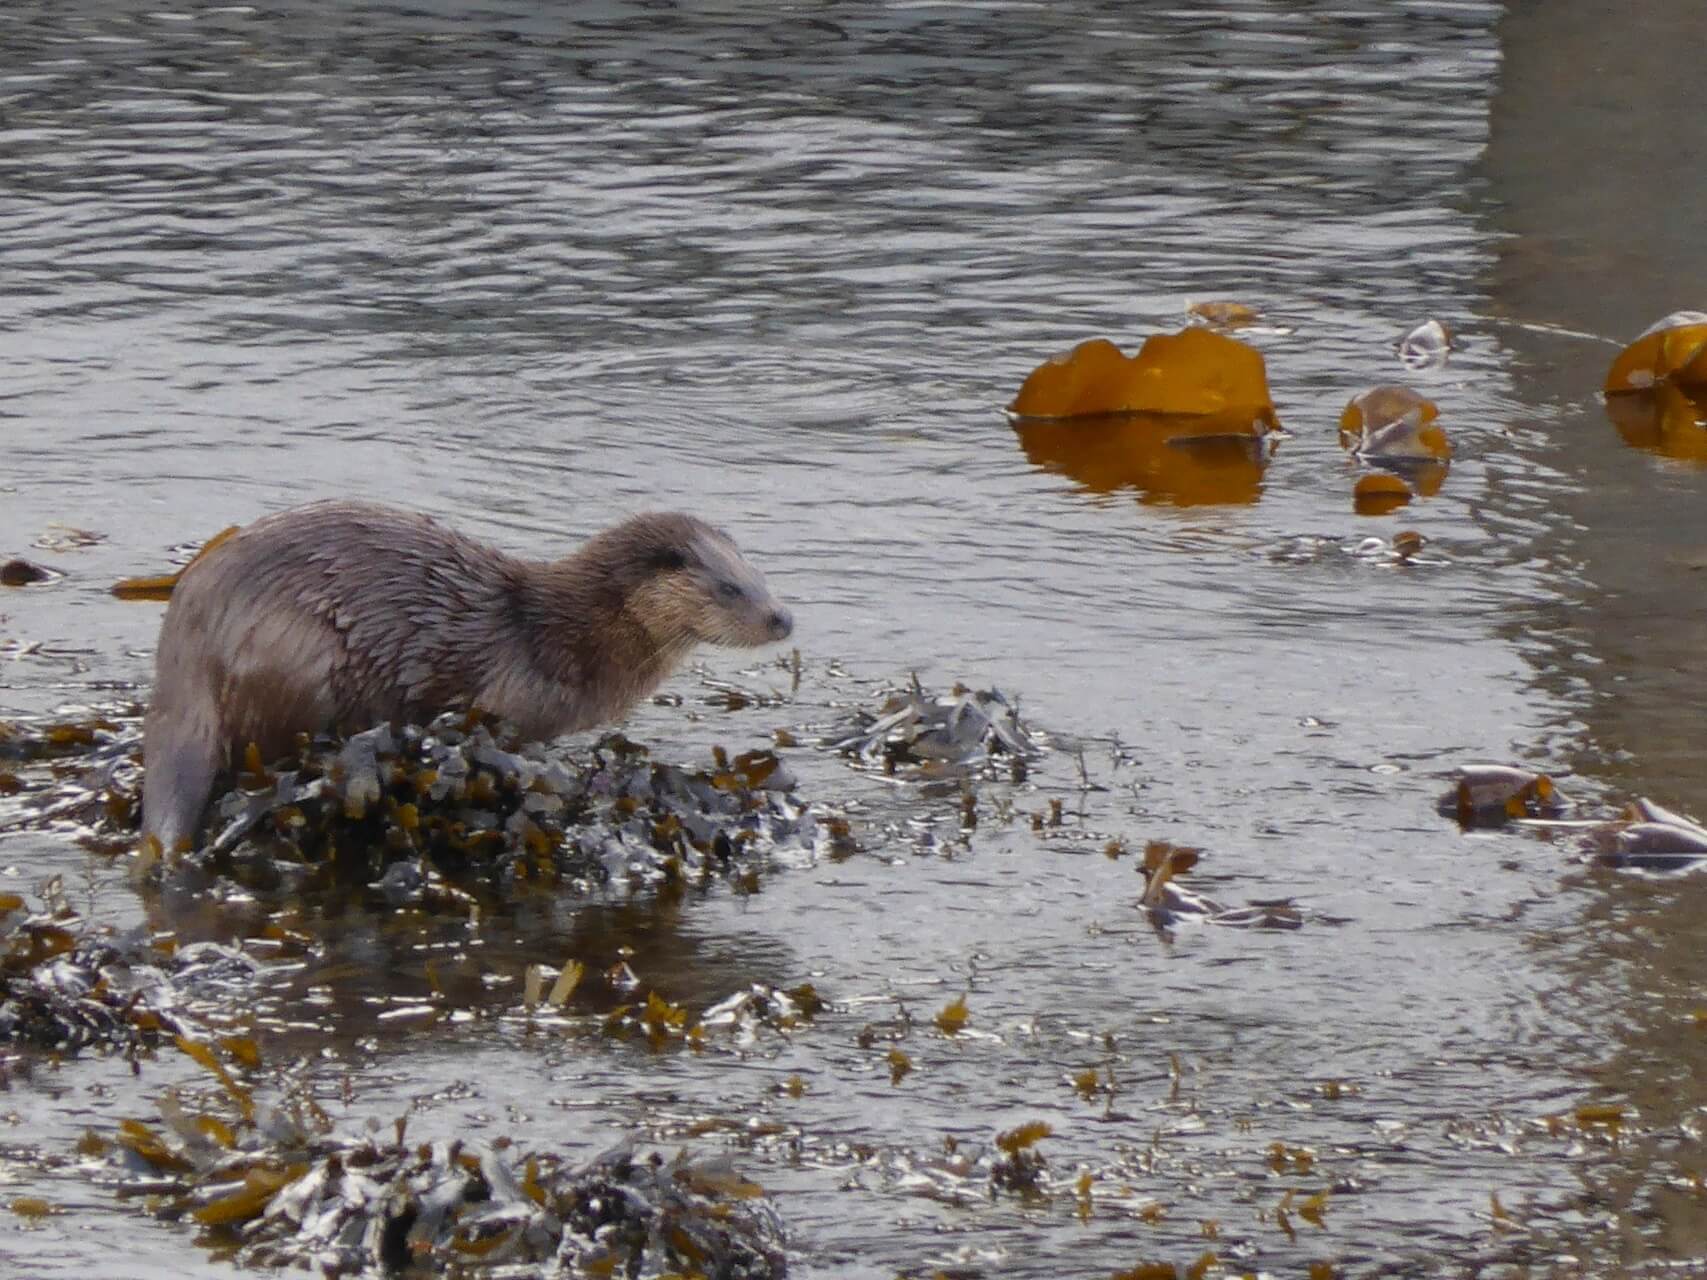 An otter in Craignure Harbour, Isle of Mull.